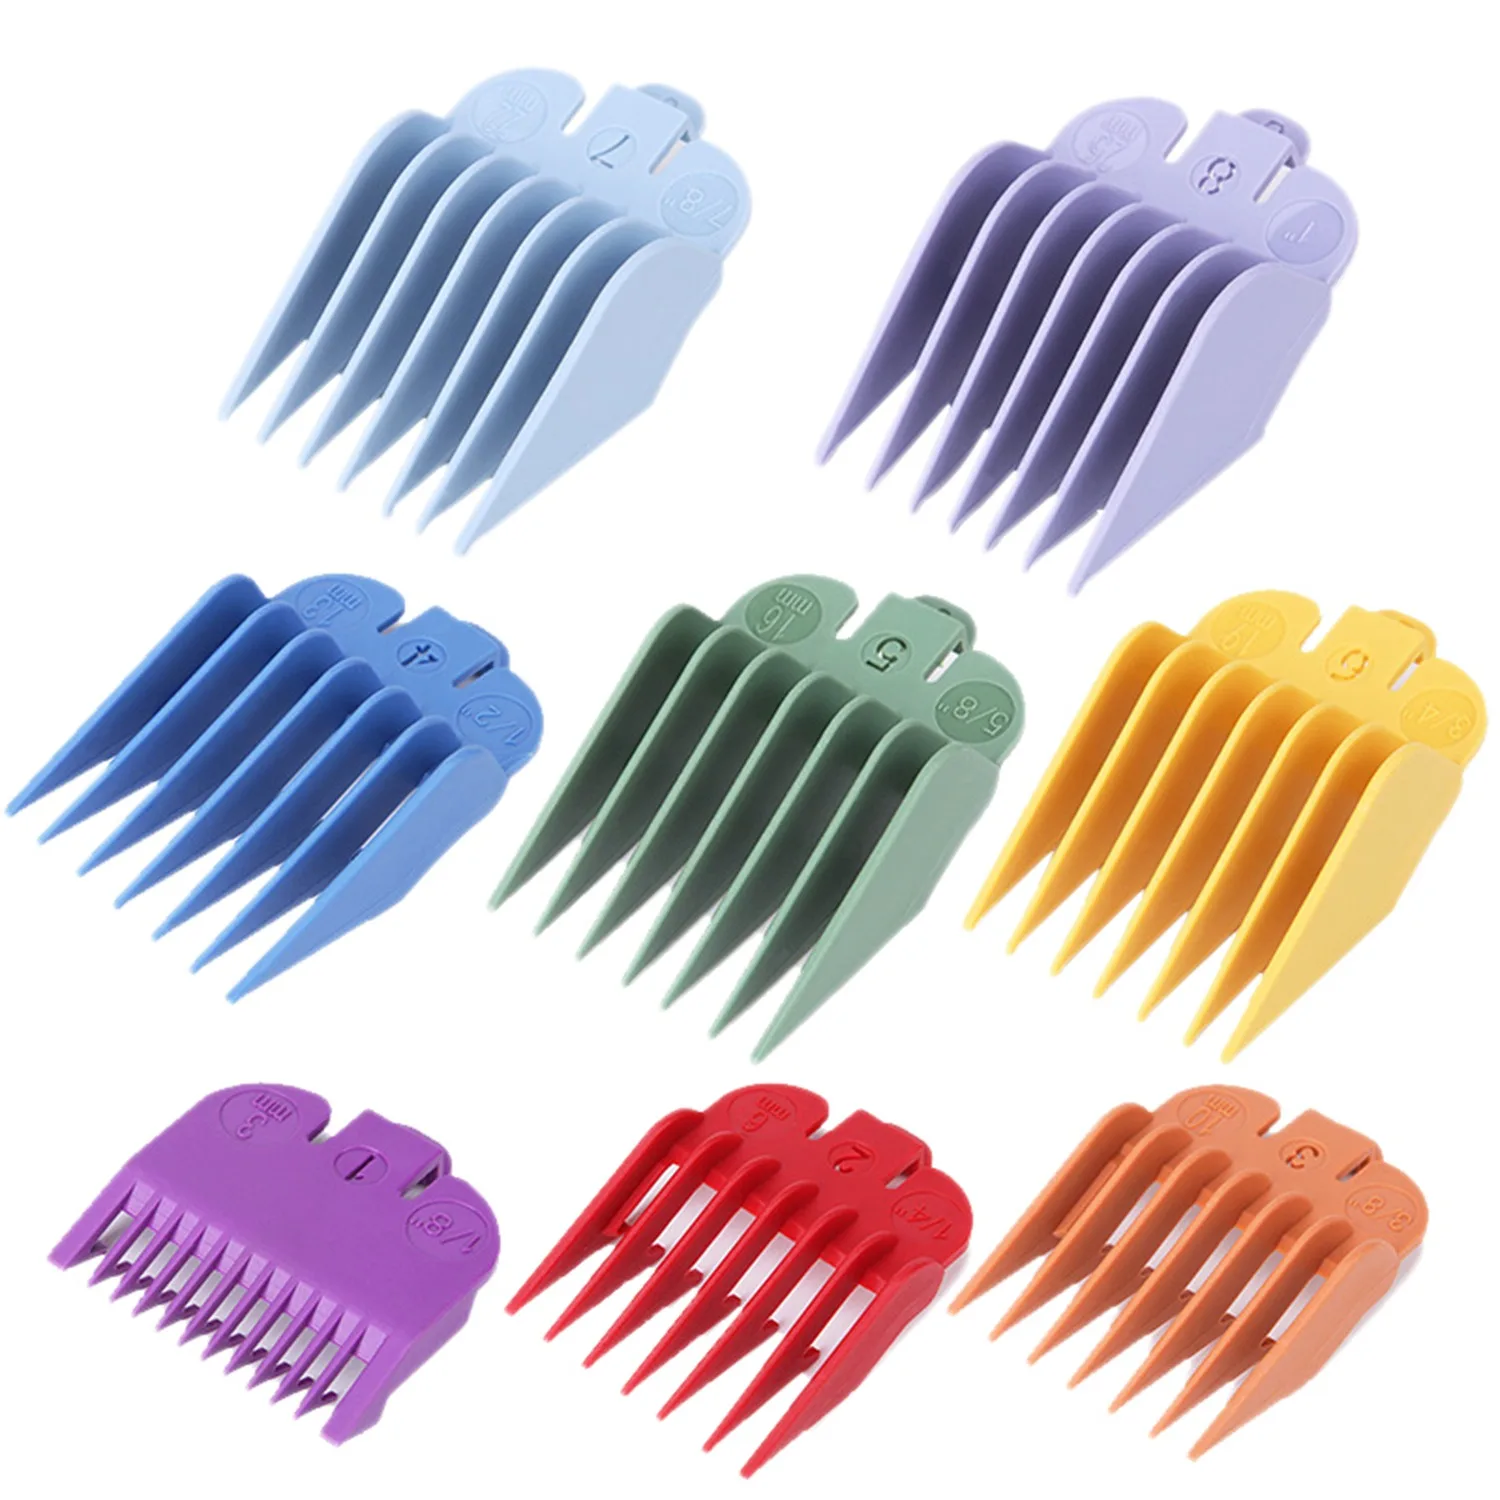 

Professional Hair Clipper Replacement Sheath 8 Colors&Size Limit Comb Accessory Guide Comb, Suitable for Wahl Trimmers